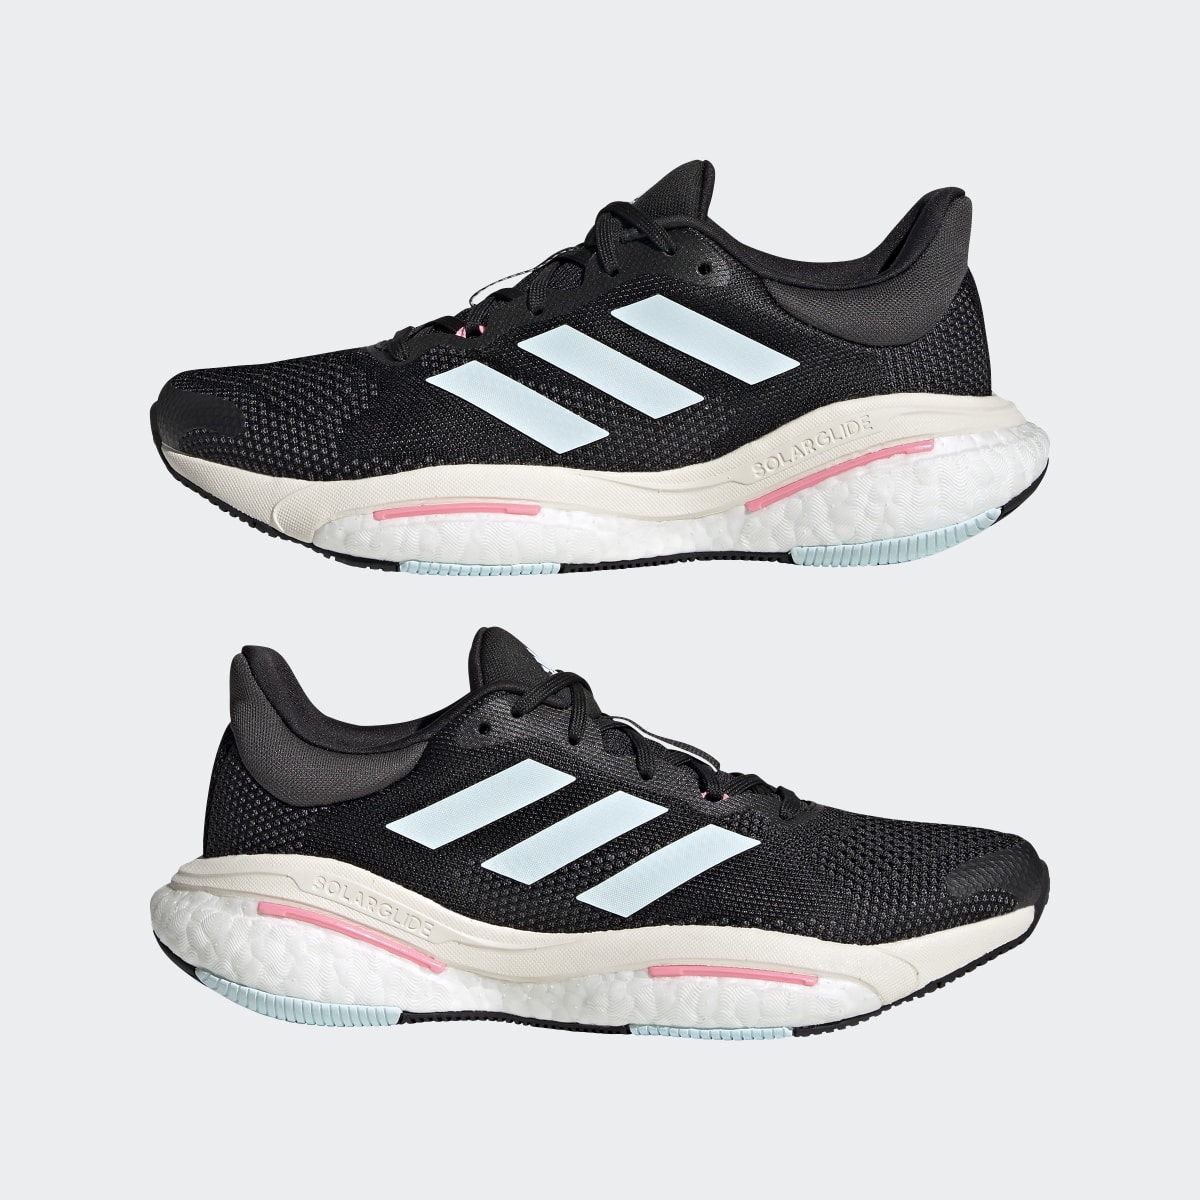 Adidas Solarglide 5 Running Shoes. 8